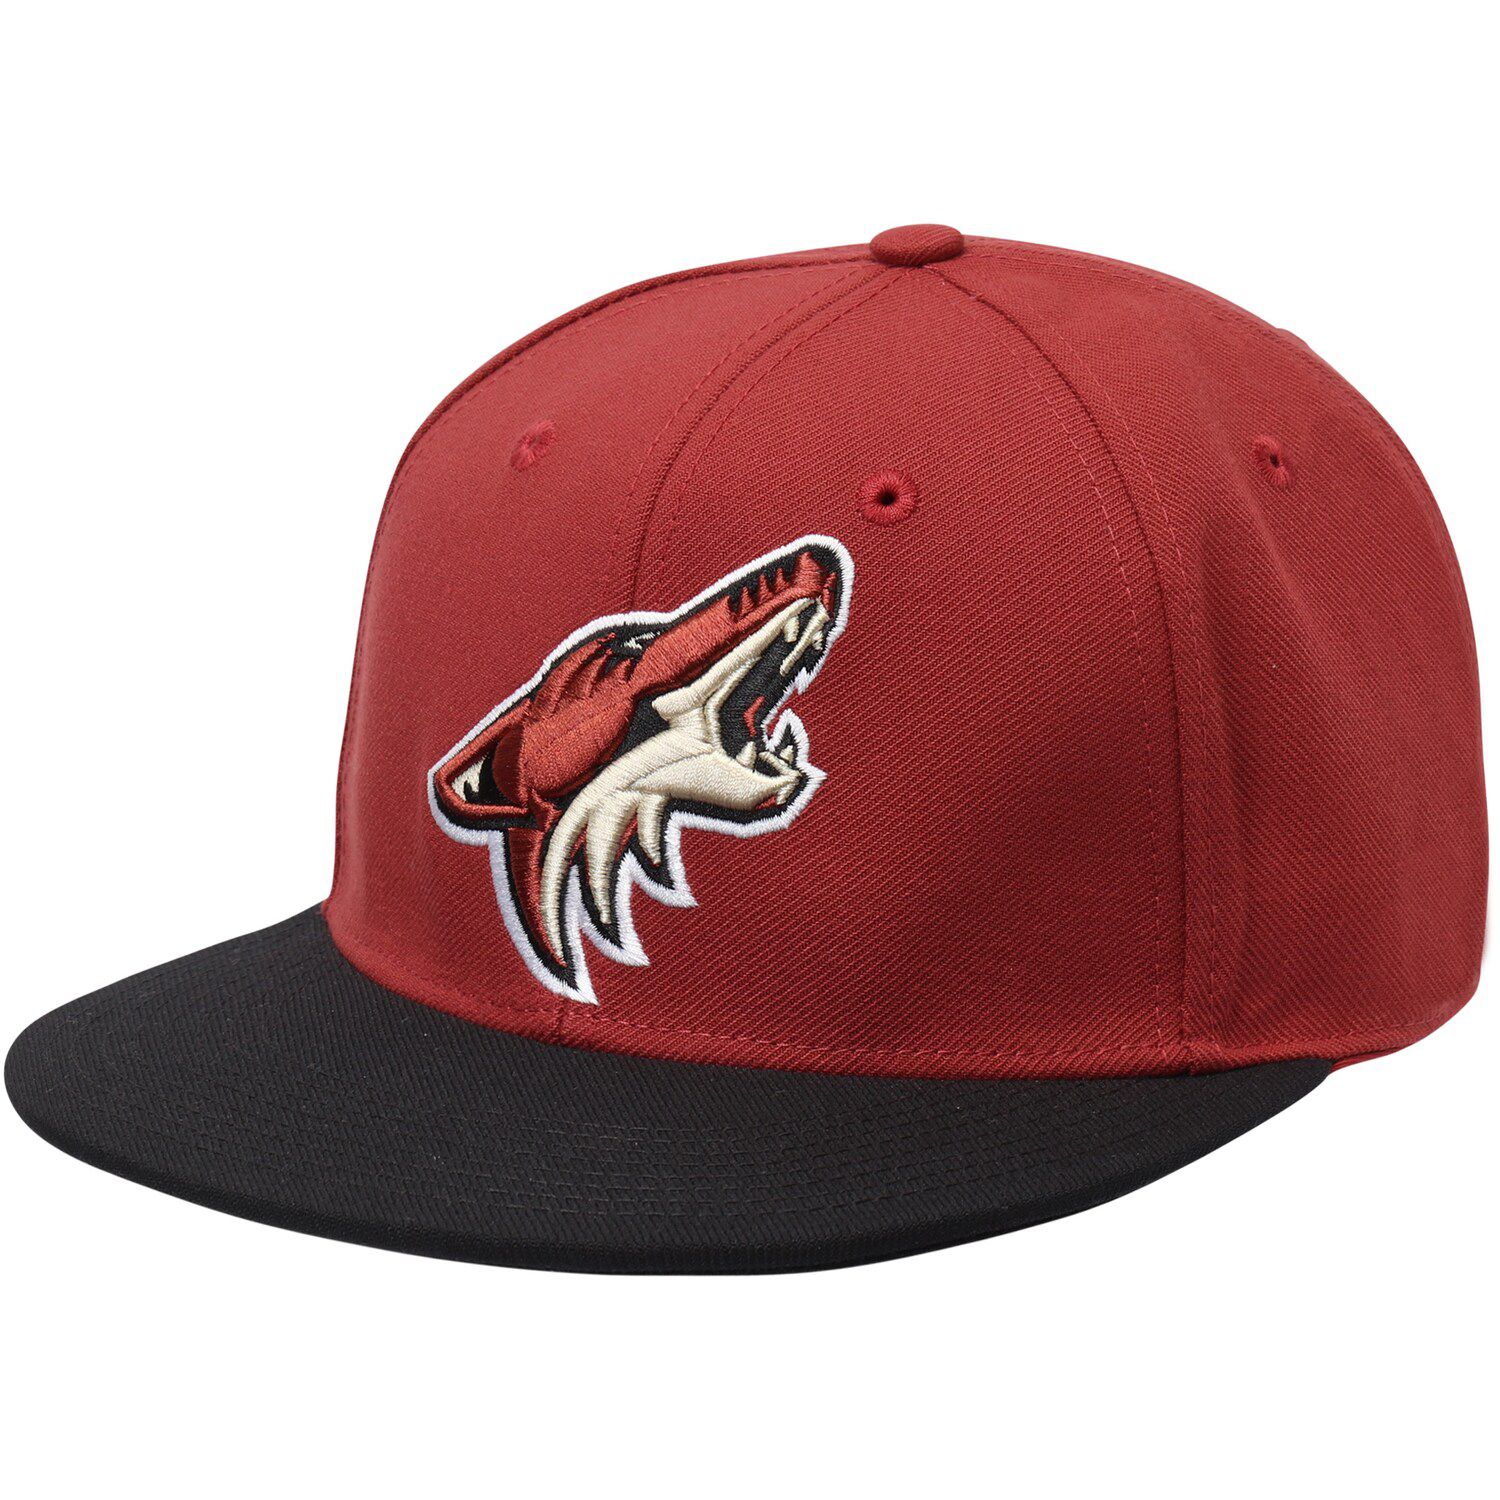 Arizona Coyotes Basic Two-Tone Fitted Hat